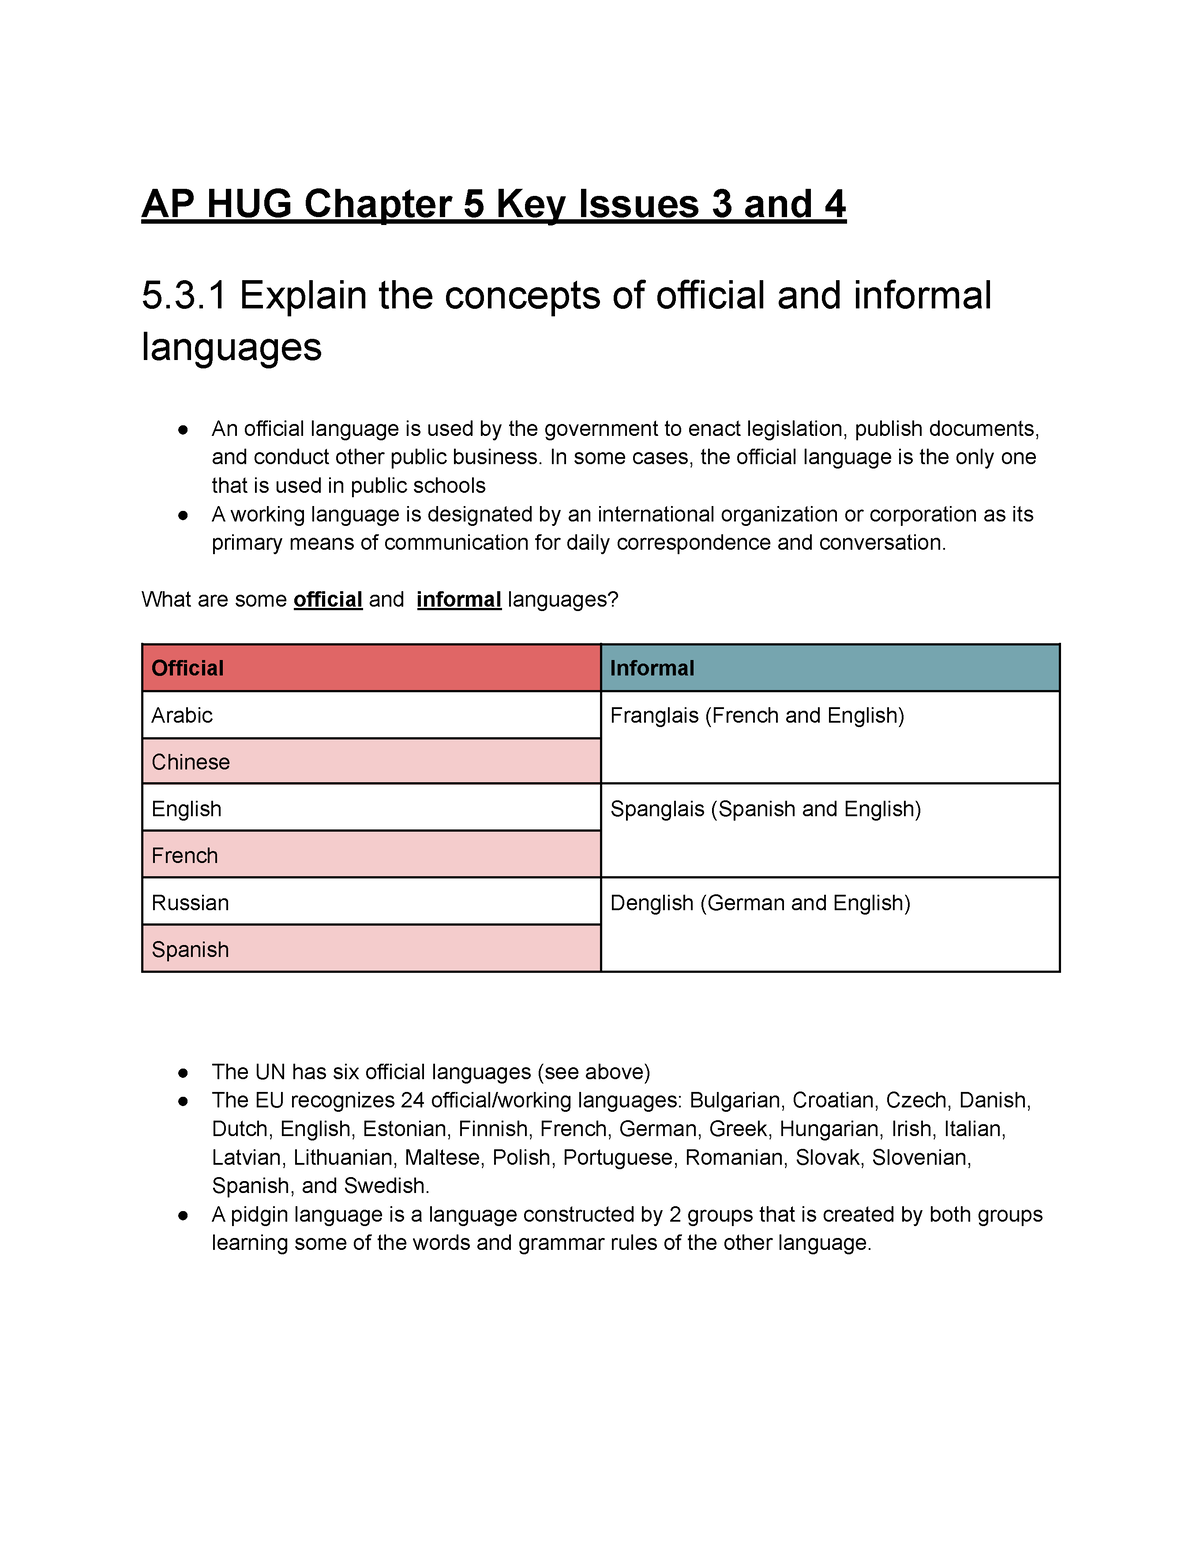 AP HUG Chapter 5 Key Issues 3 and 4 AP HUG Chapter 5 Key Issues 3 and